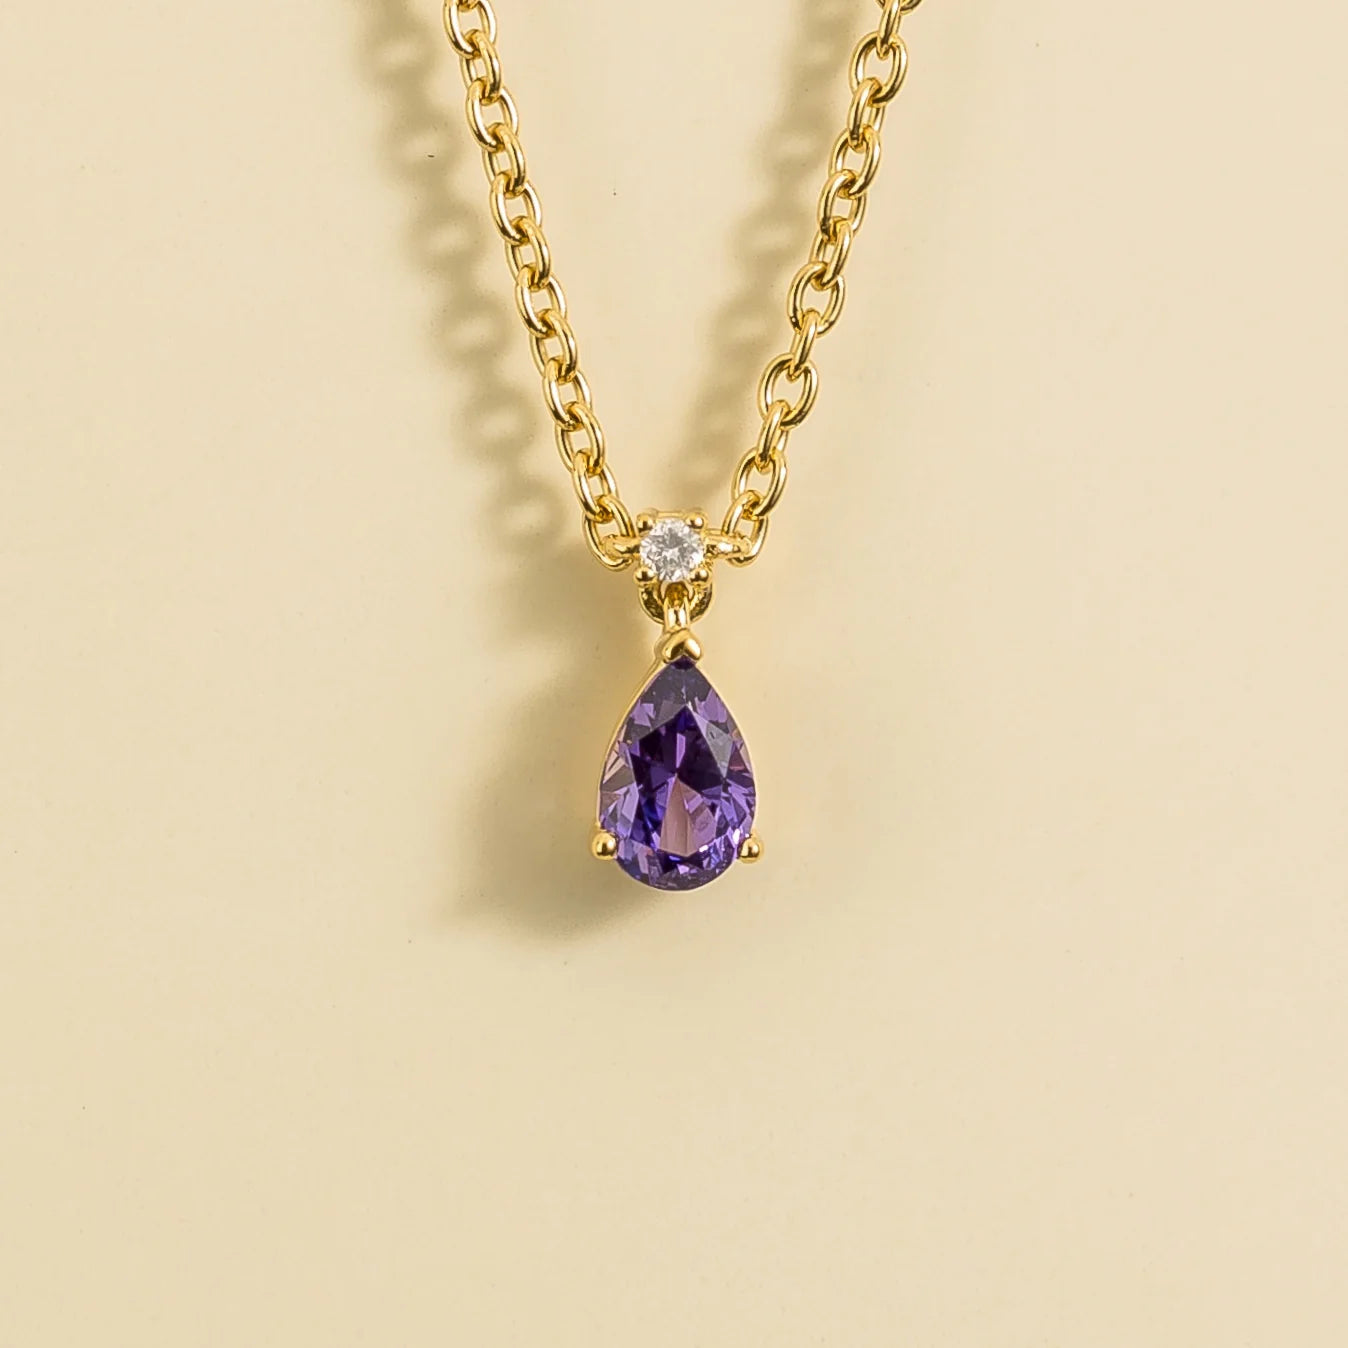 Ori Small Pendant Necklace In Purple Sapphire and Diamond Set In Gold By Bespoke Jewellery London